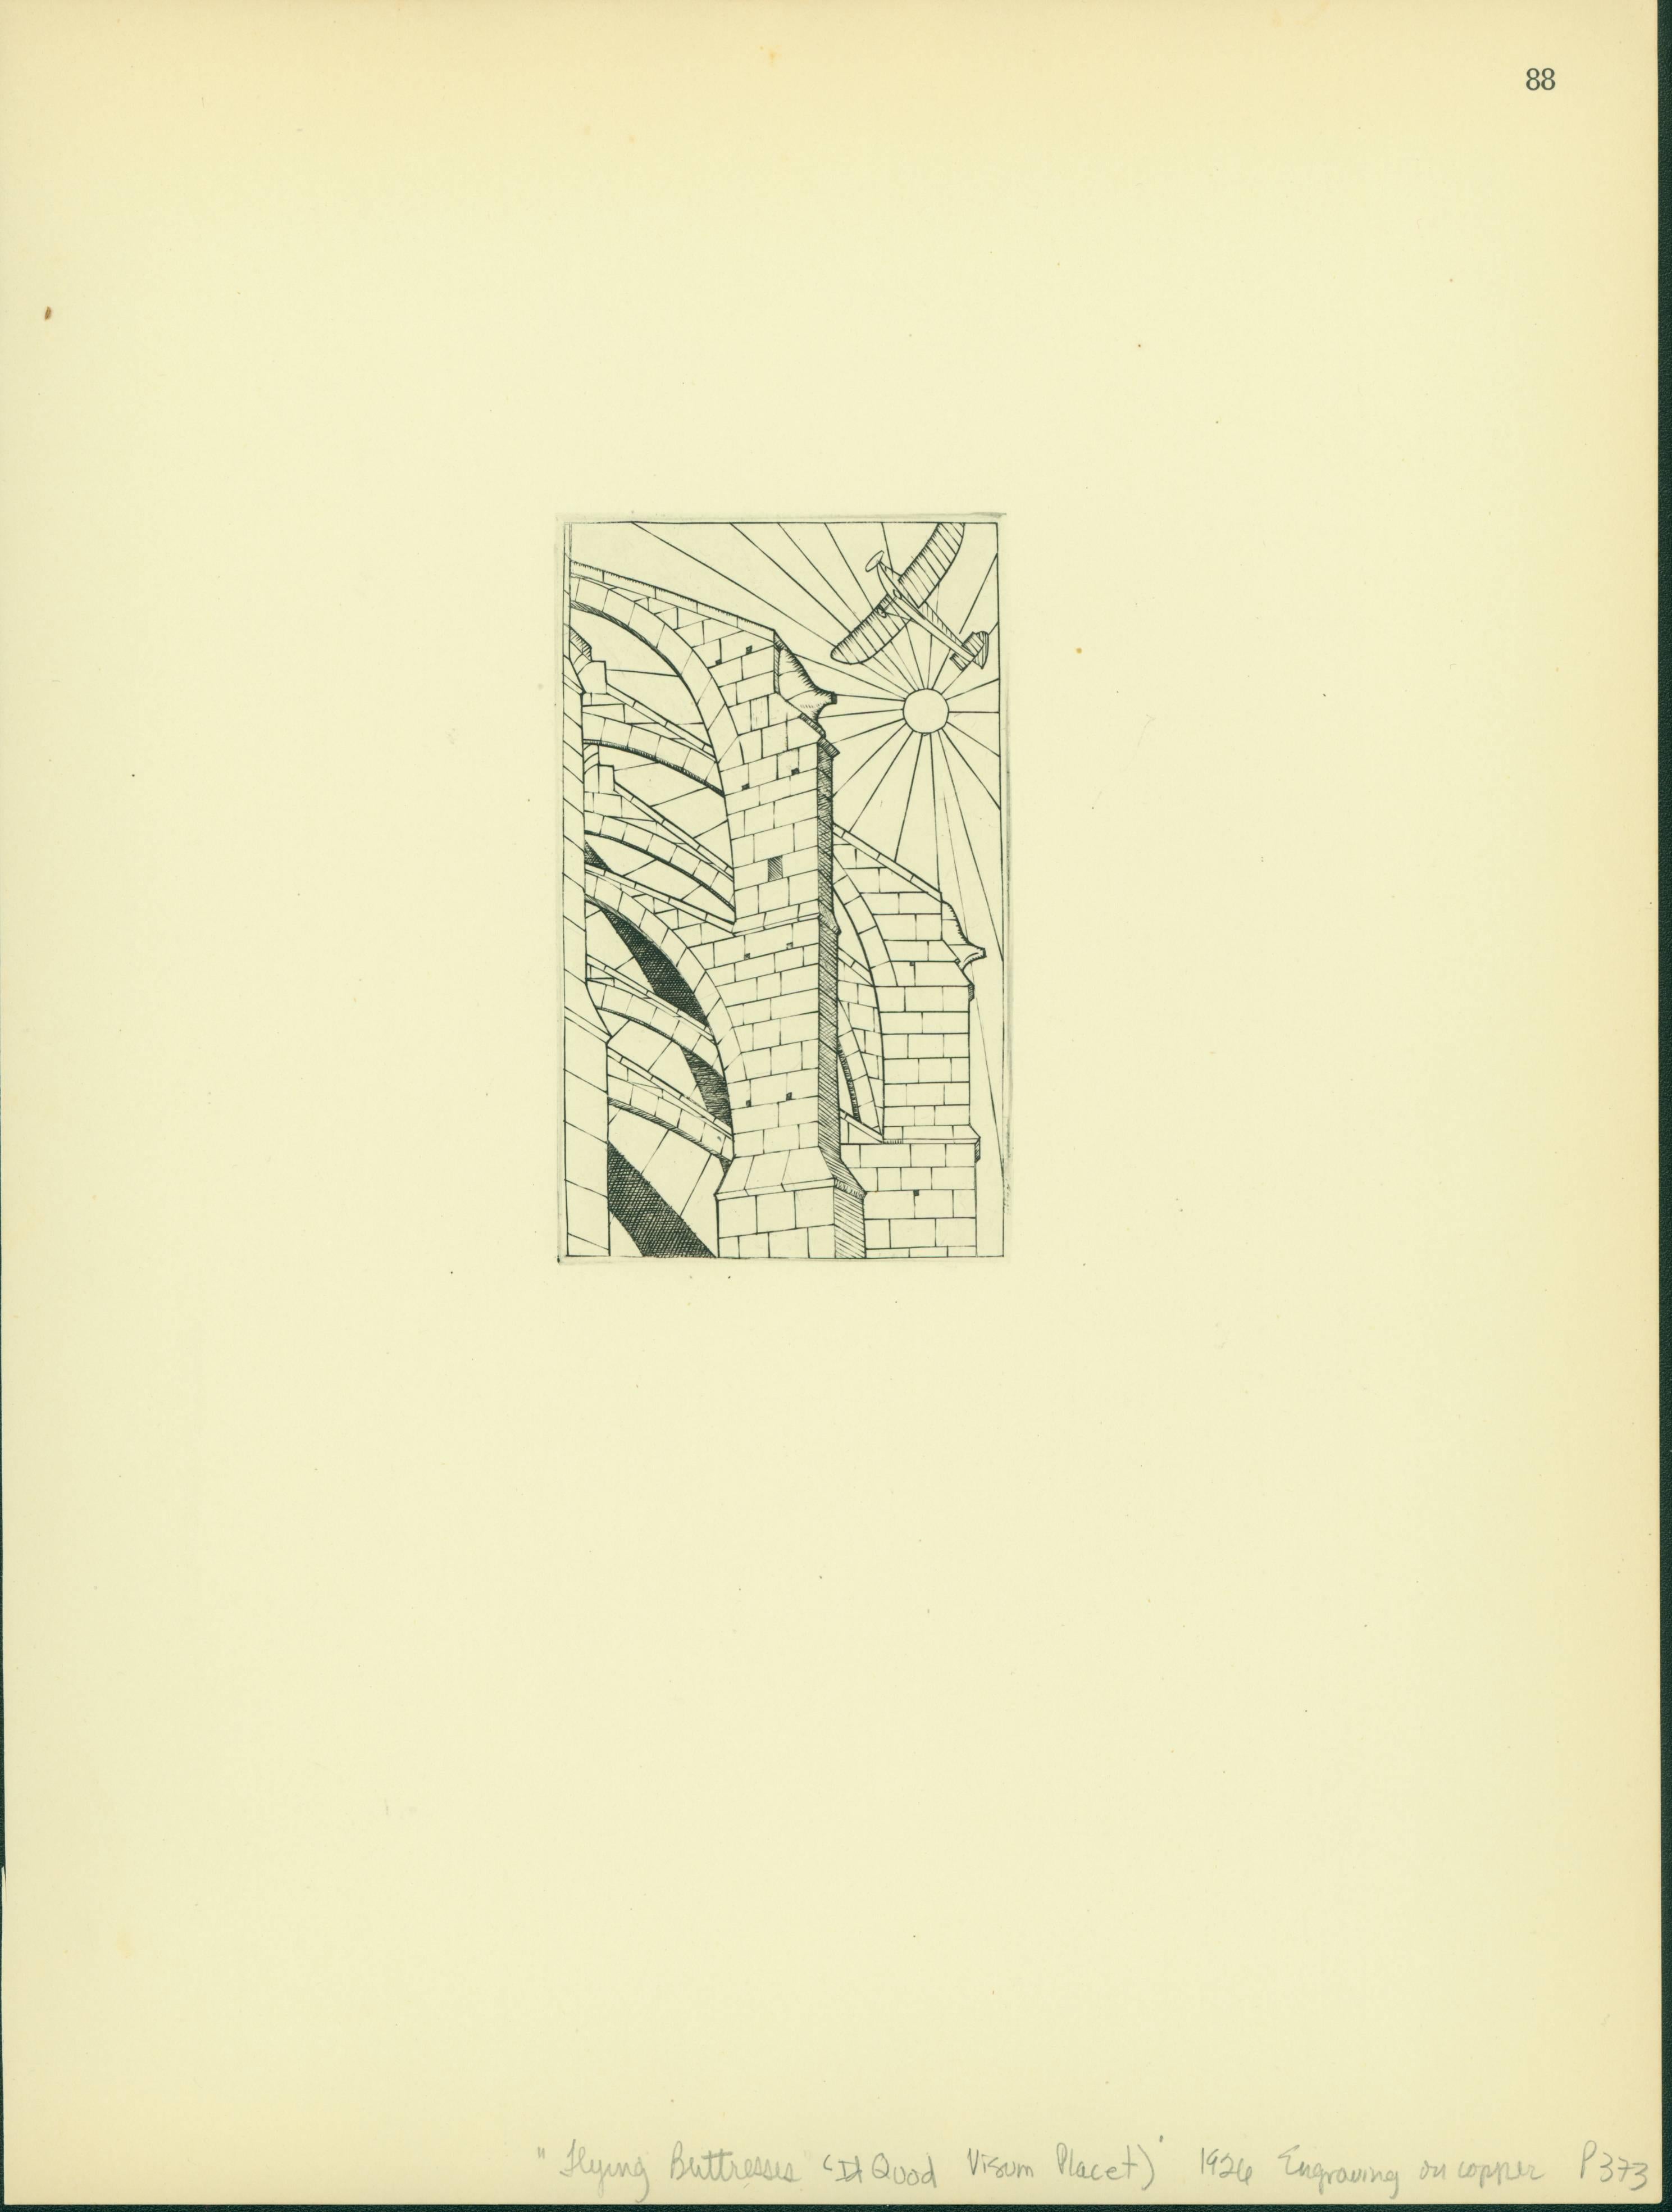 Flying Buttresses (Id Quod Visum Placet) - Print by Eric Gill